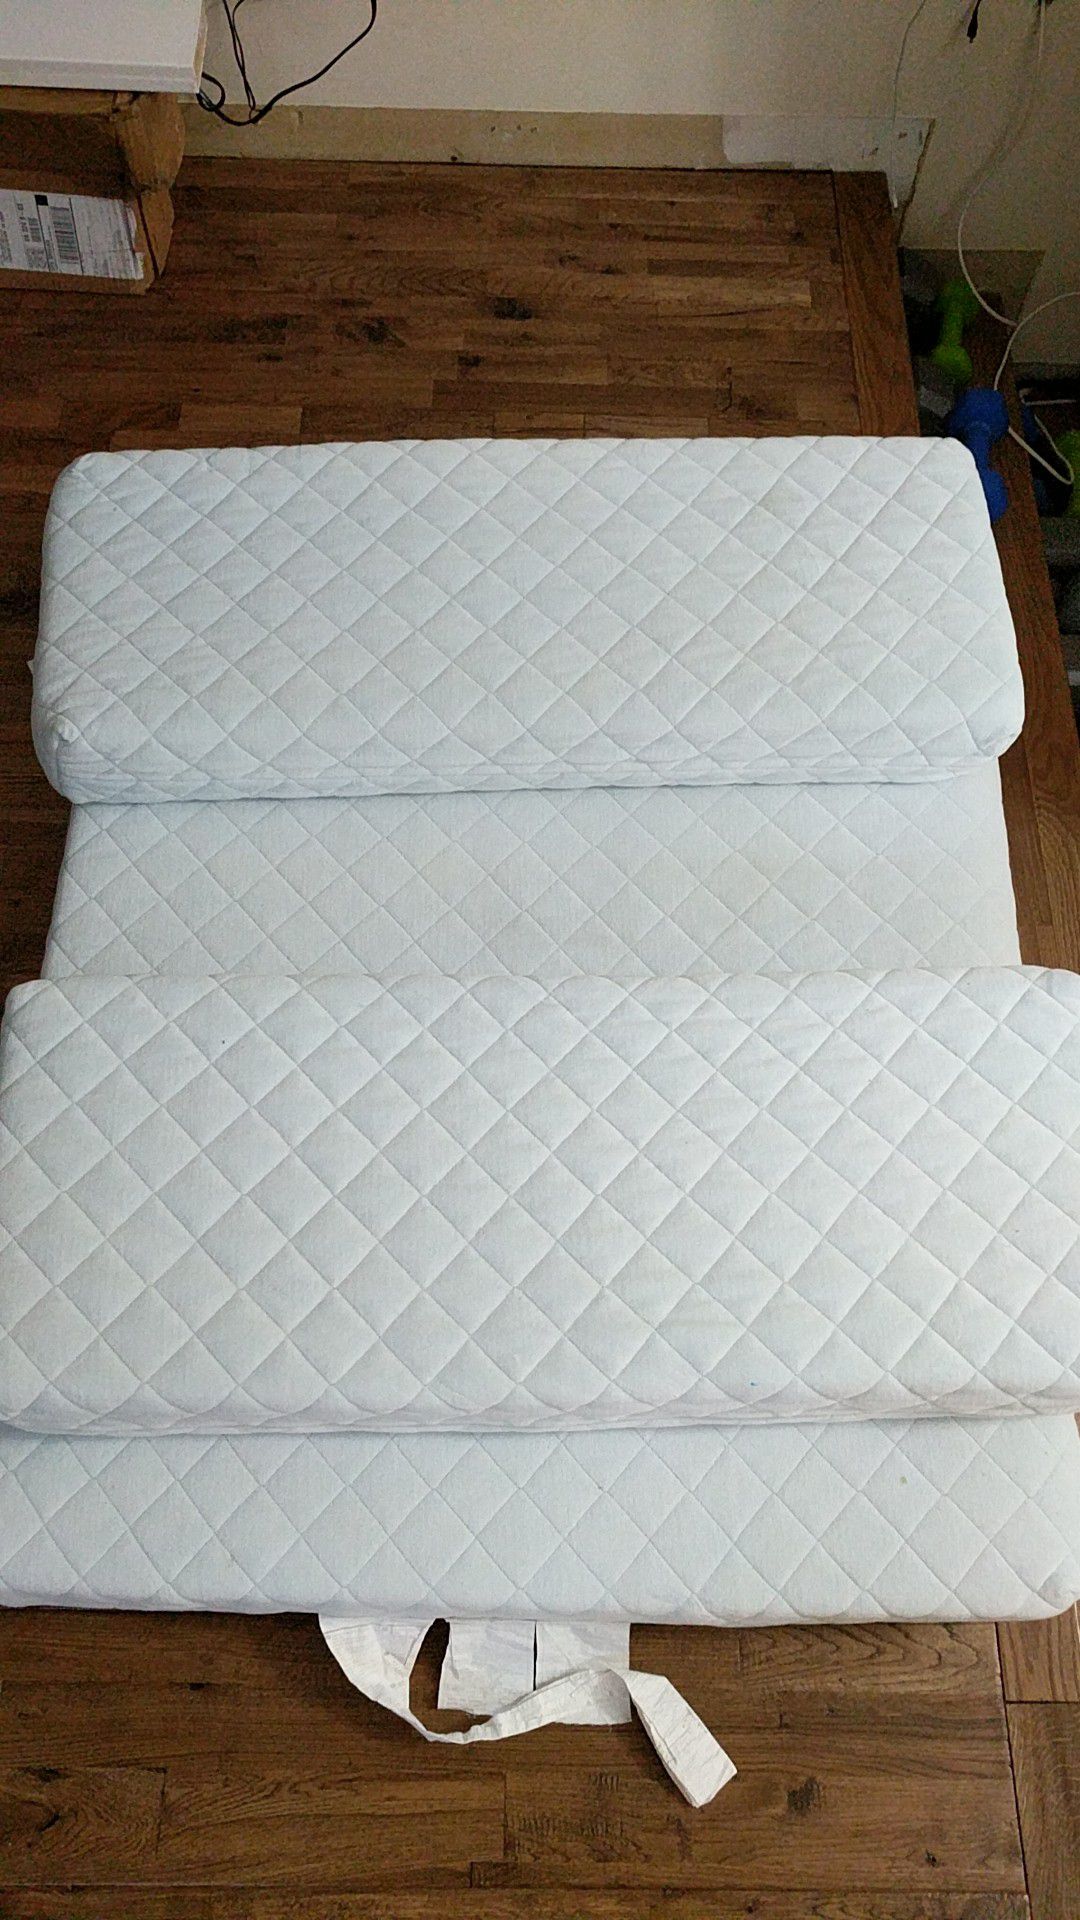 Free Ikea Mattress for Extendable Kids' Bed